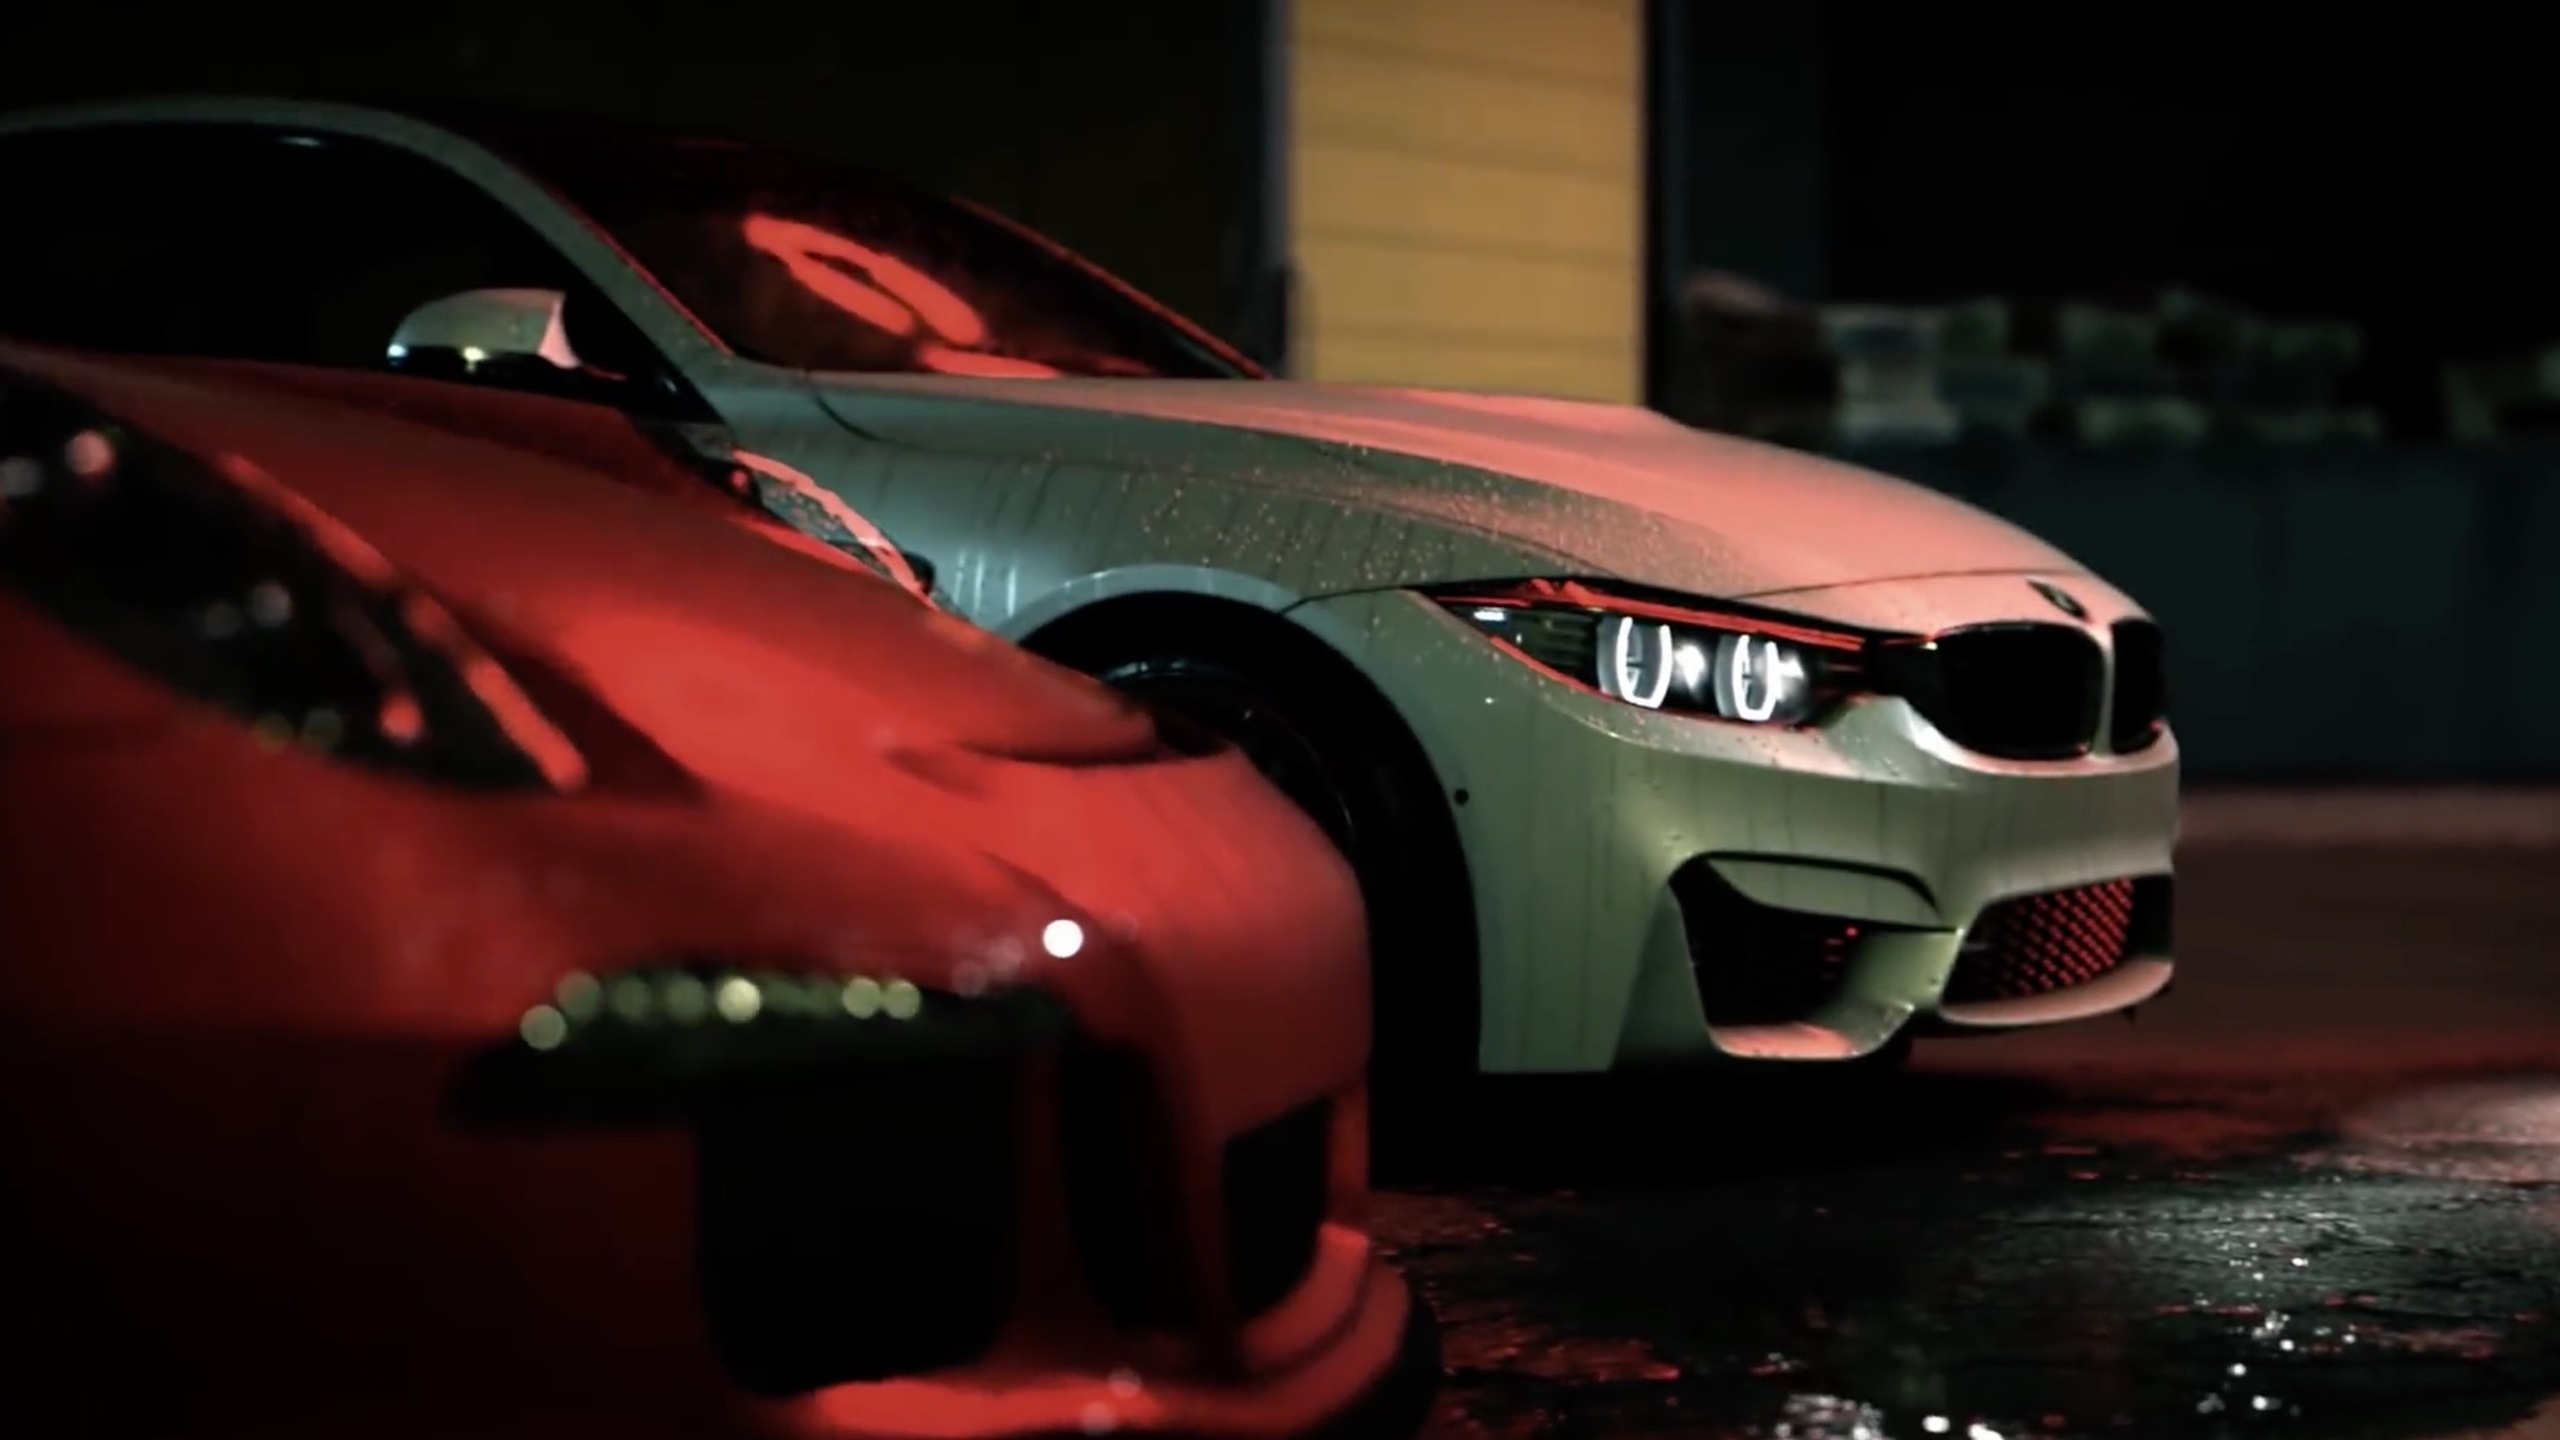 Need For Speed BMW and Porsche for 2560x1440 HDTV resolution